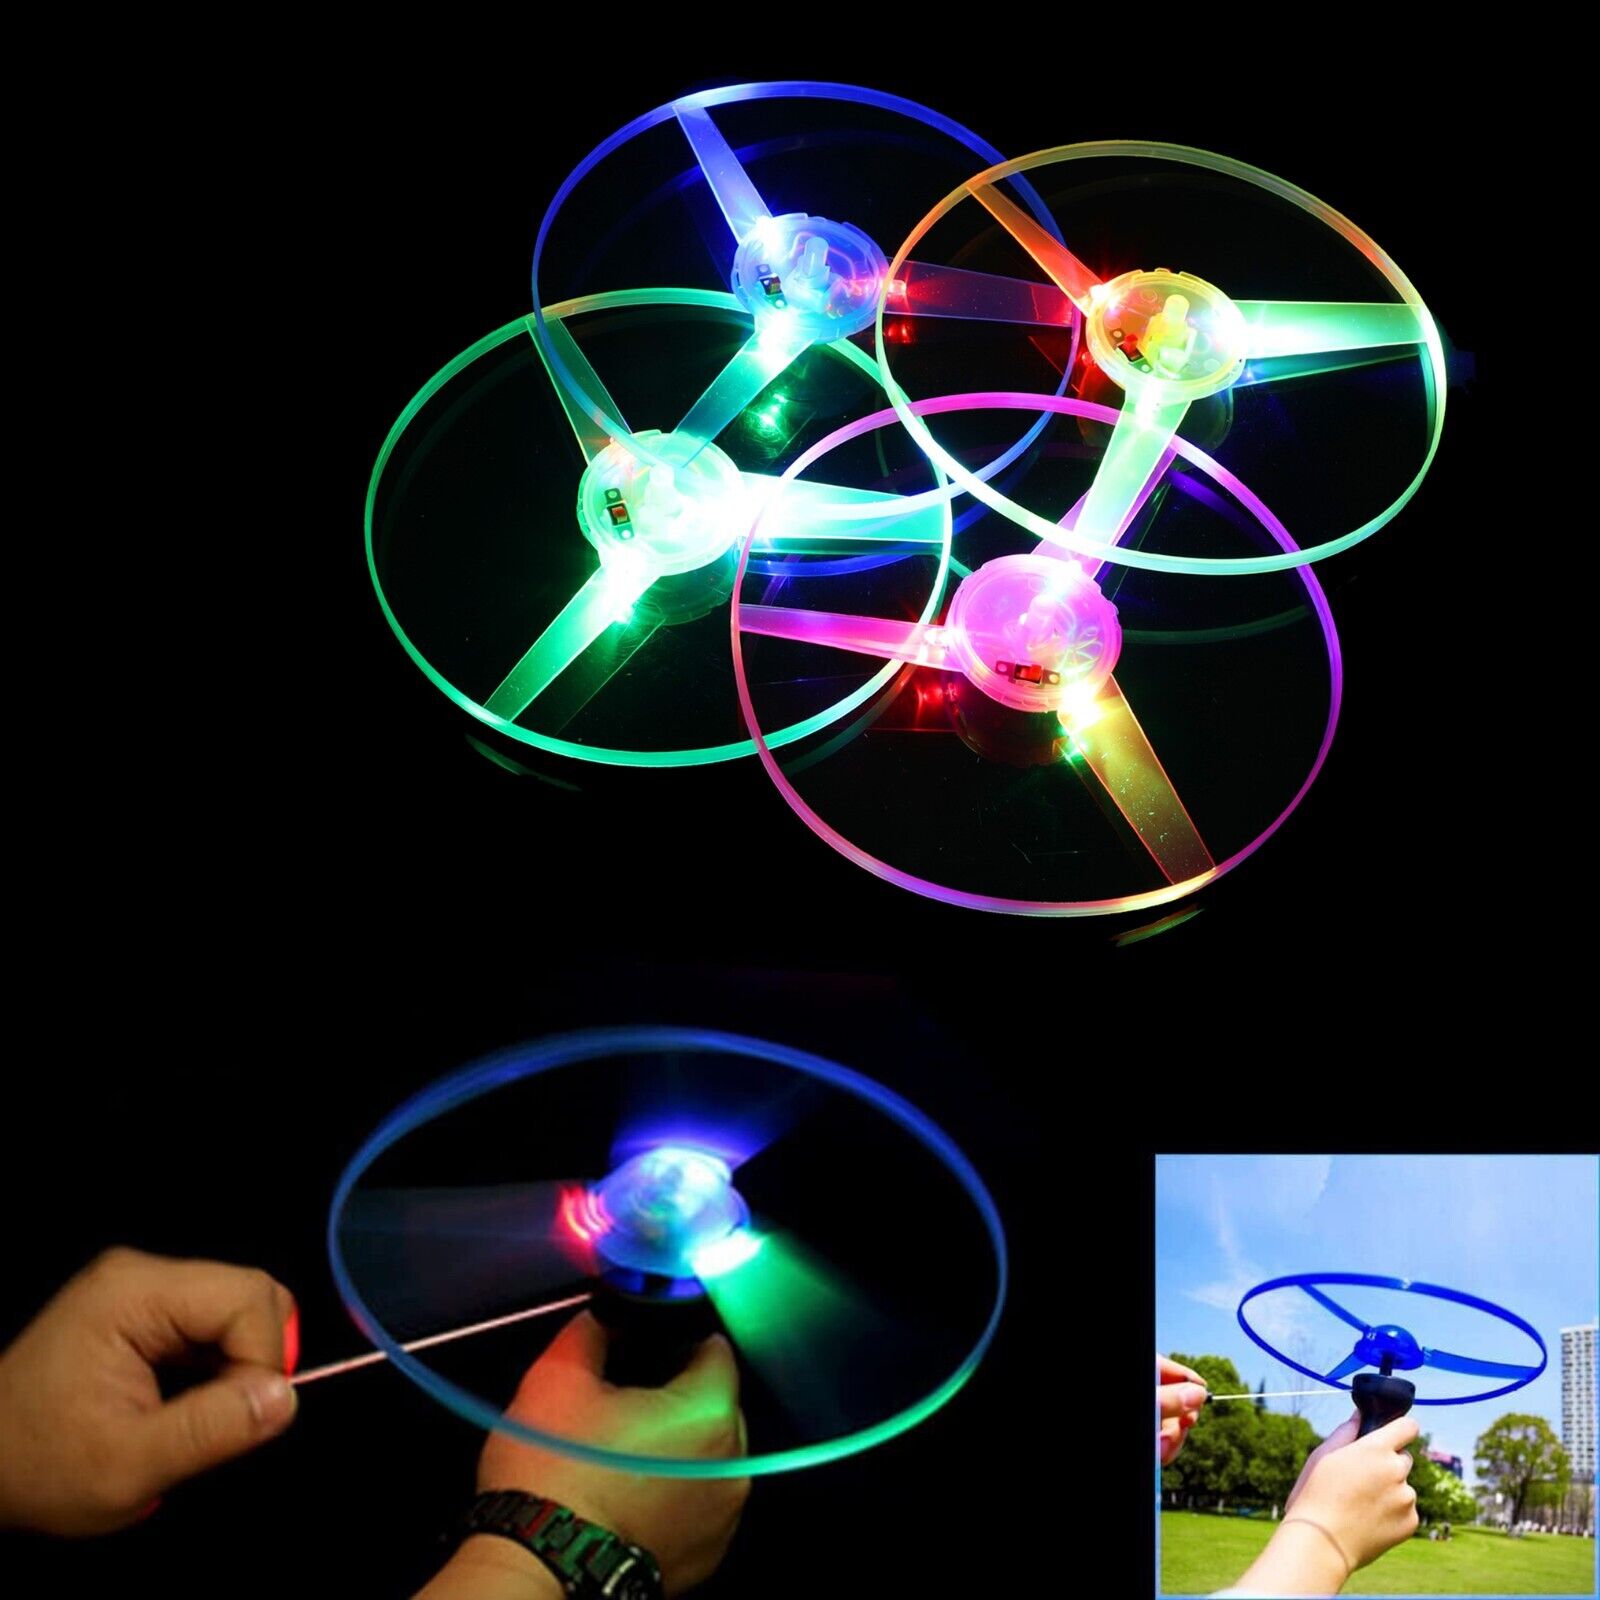 4 PC Flying Toys Light-Up Disco Flyers– Flying Disc with Colorful LED Lights